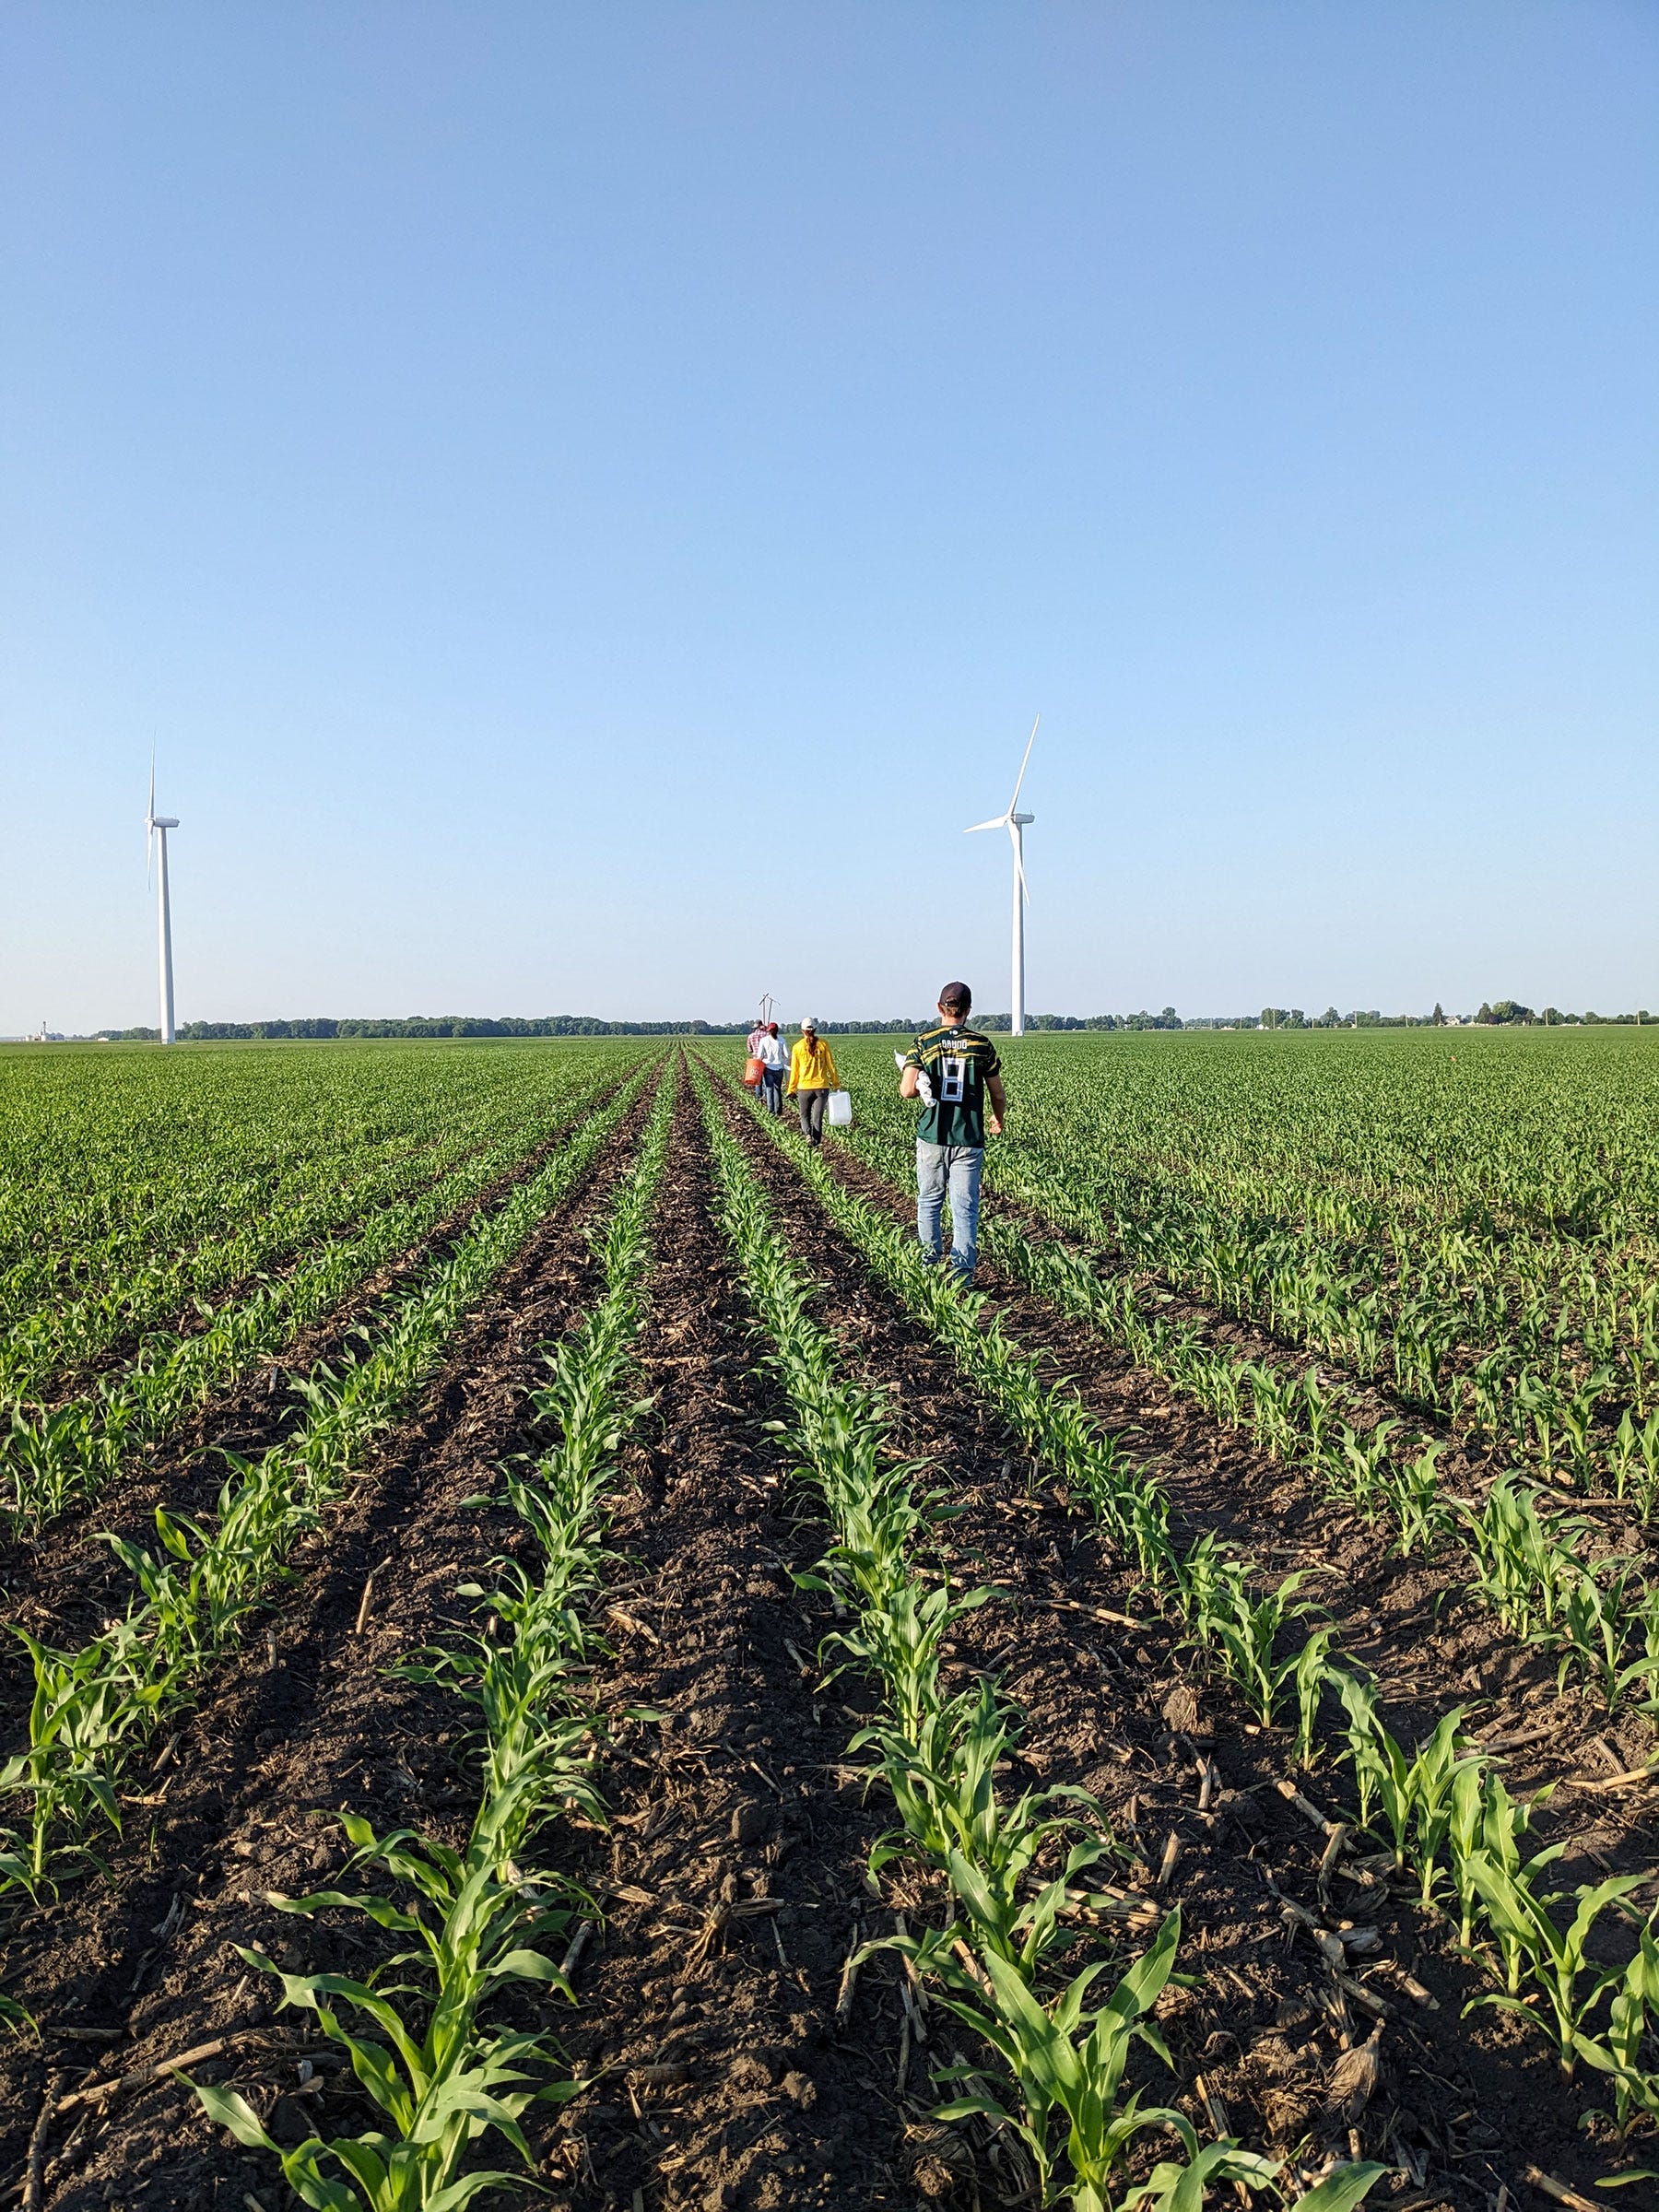 Four people walking away through rows of small corn with two wind turbines against a blue sky in background